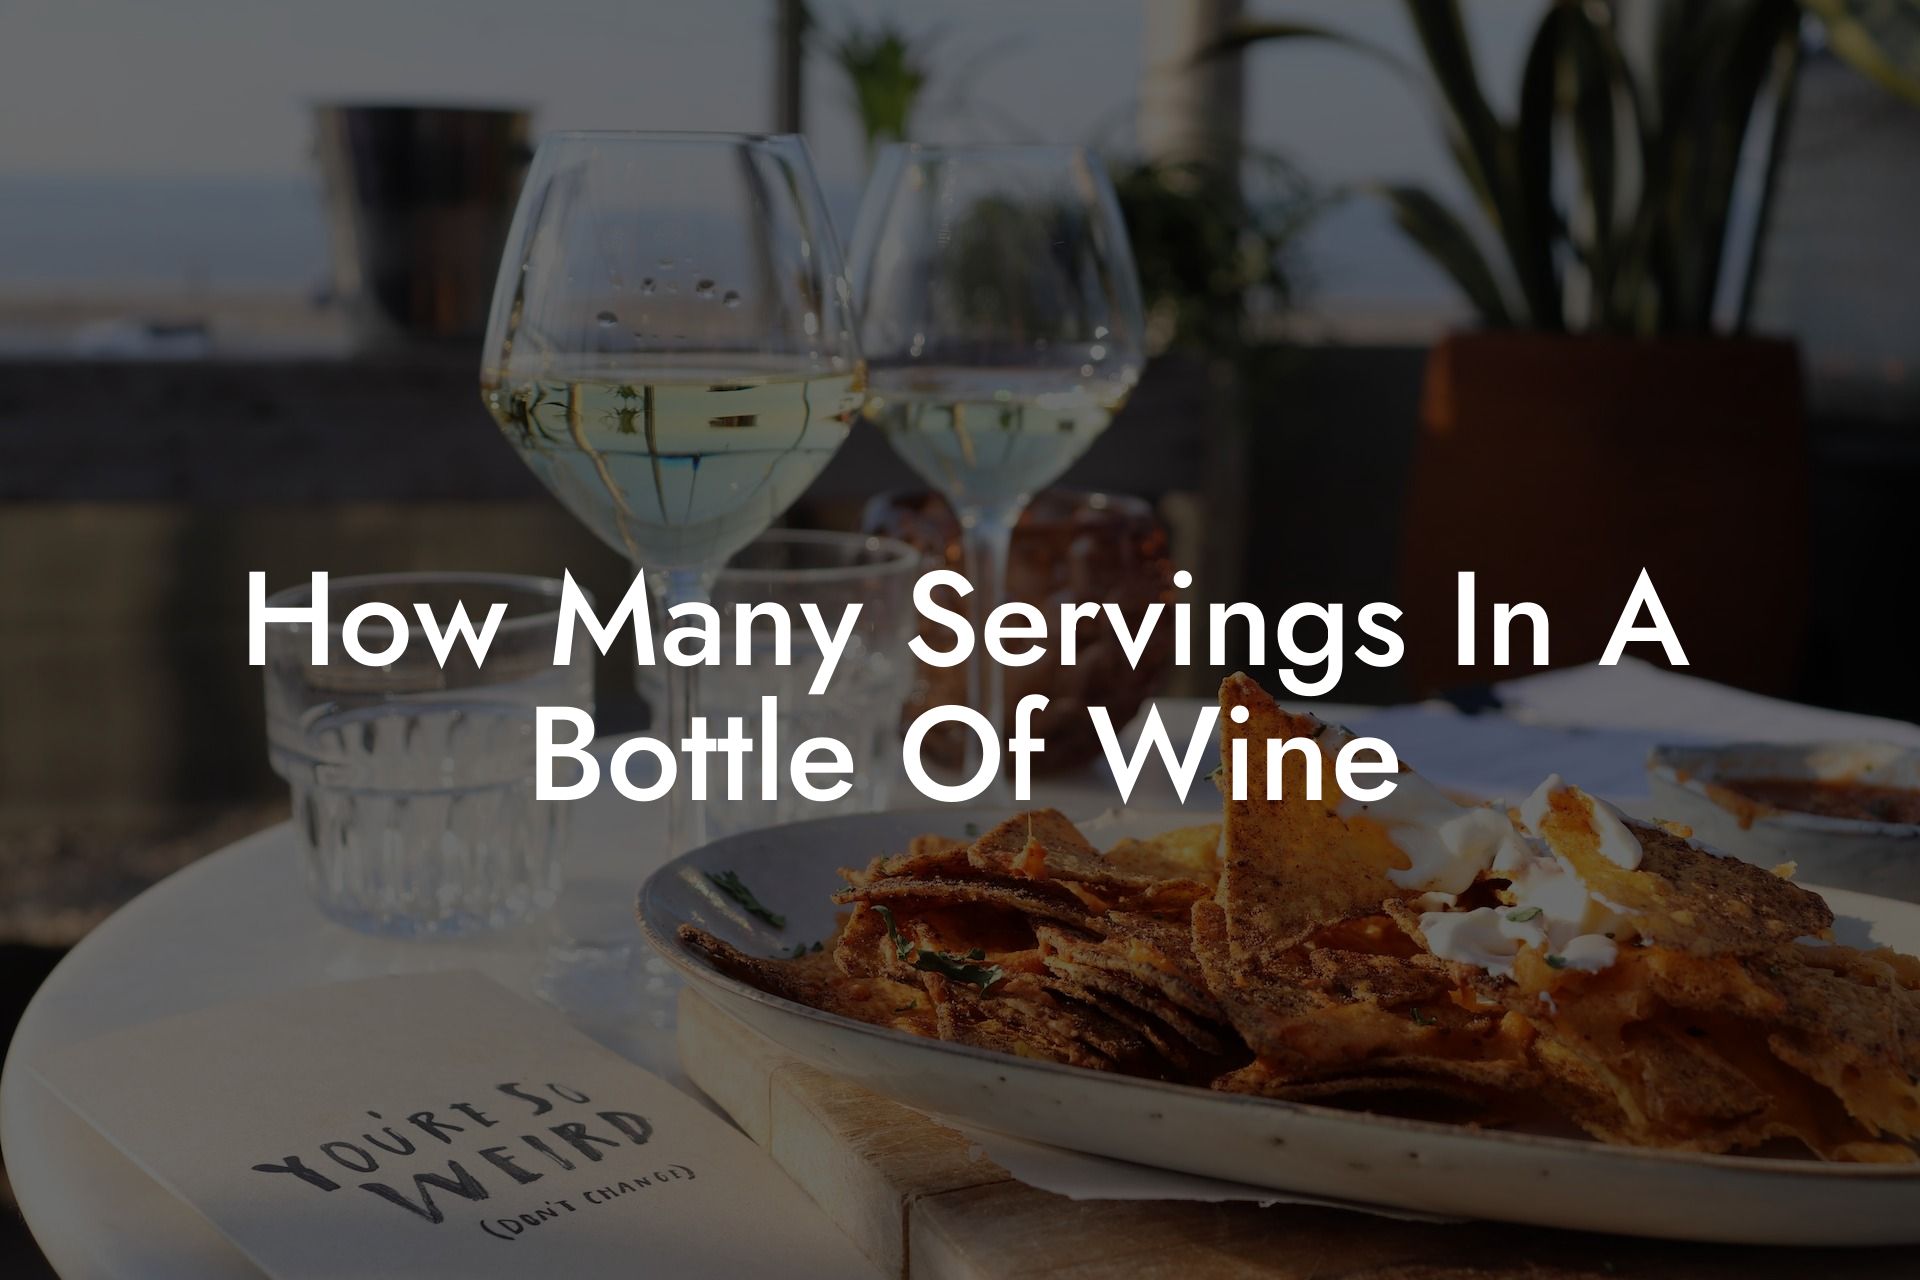 How Many Servings In A Bottle Of Wine